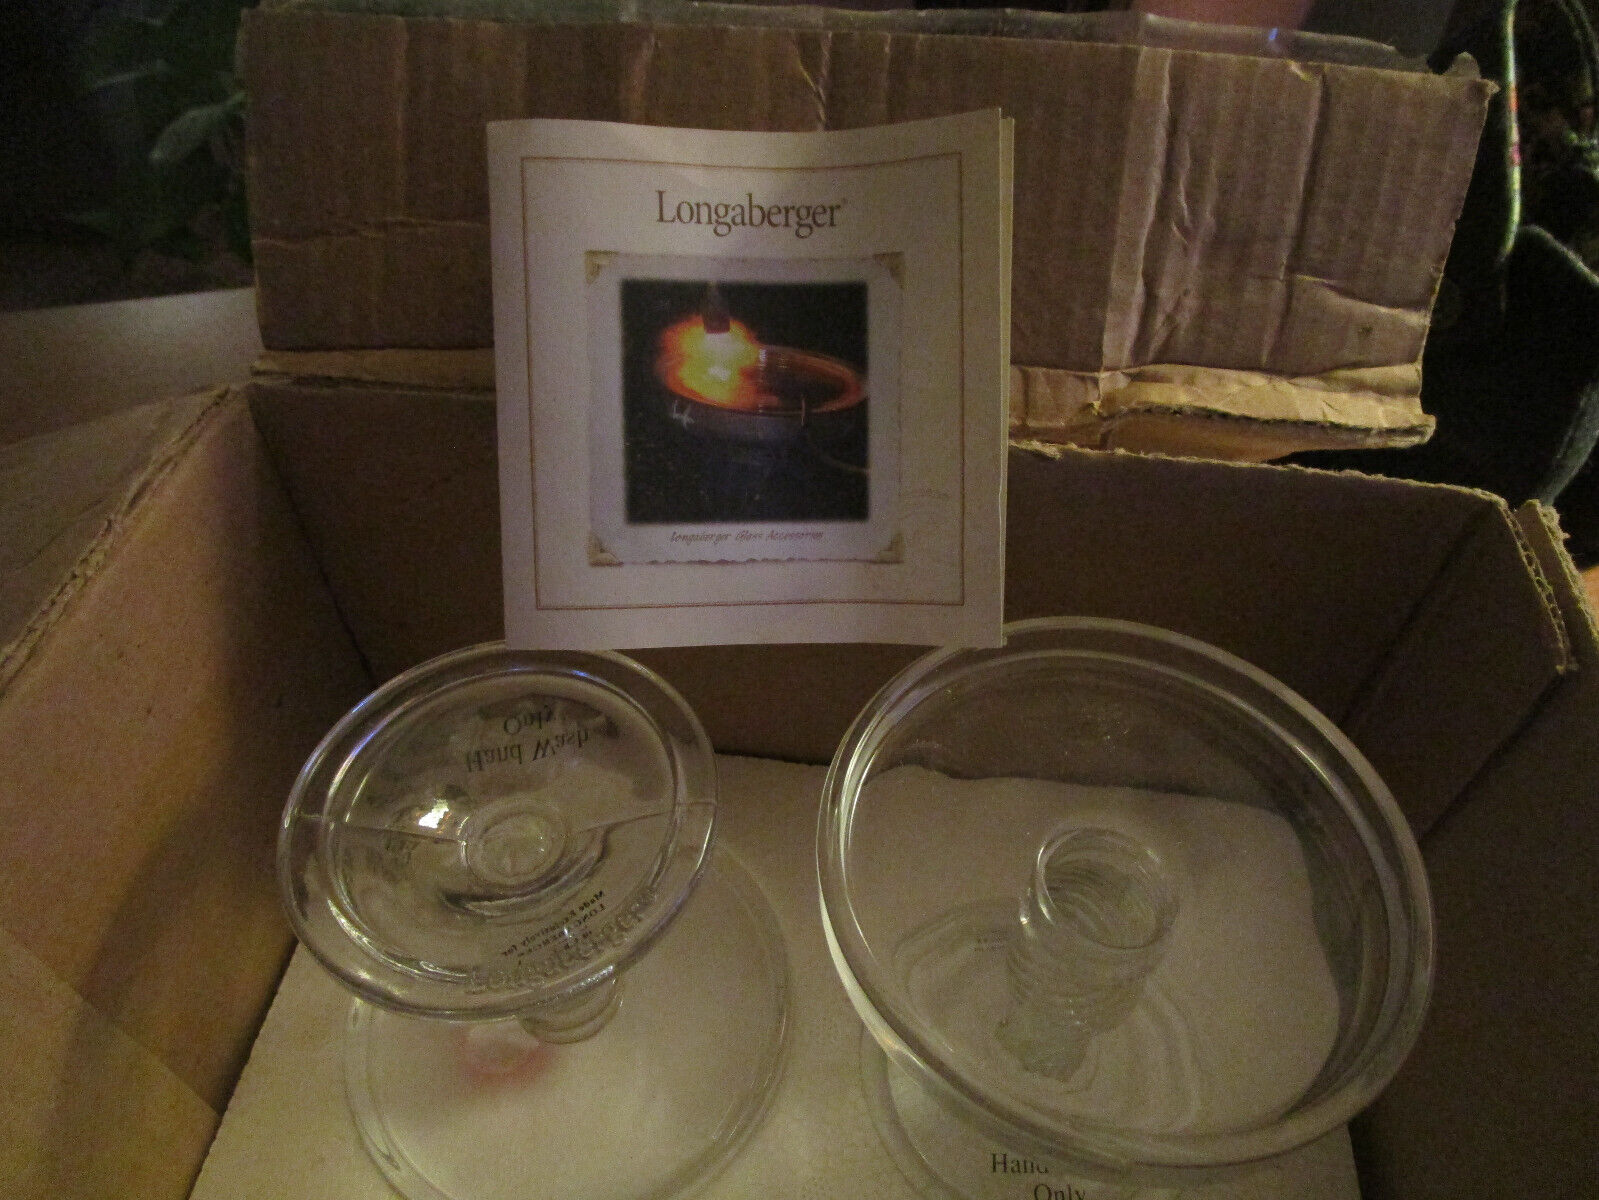 Longaberger Pottery Glass Pedestal Candle Stands Set of 2 in Box #71338